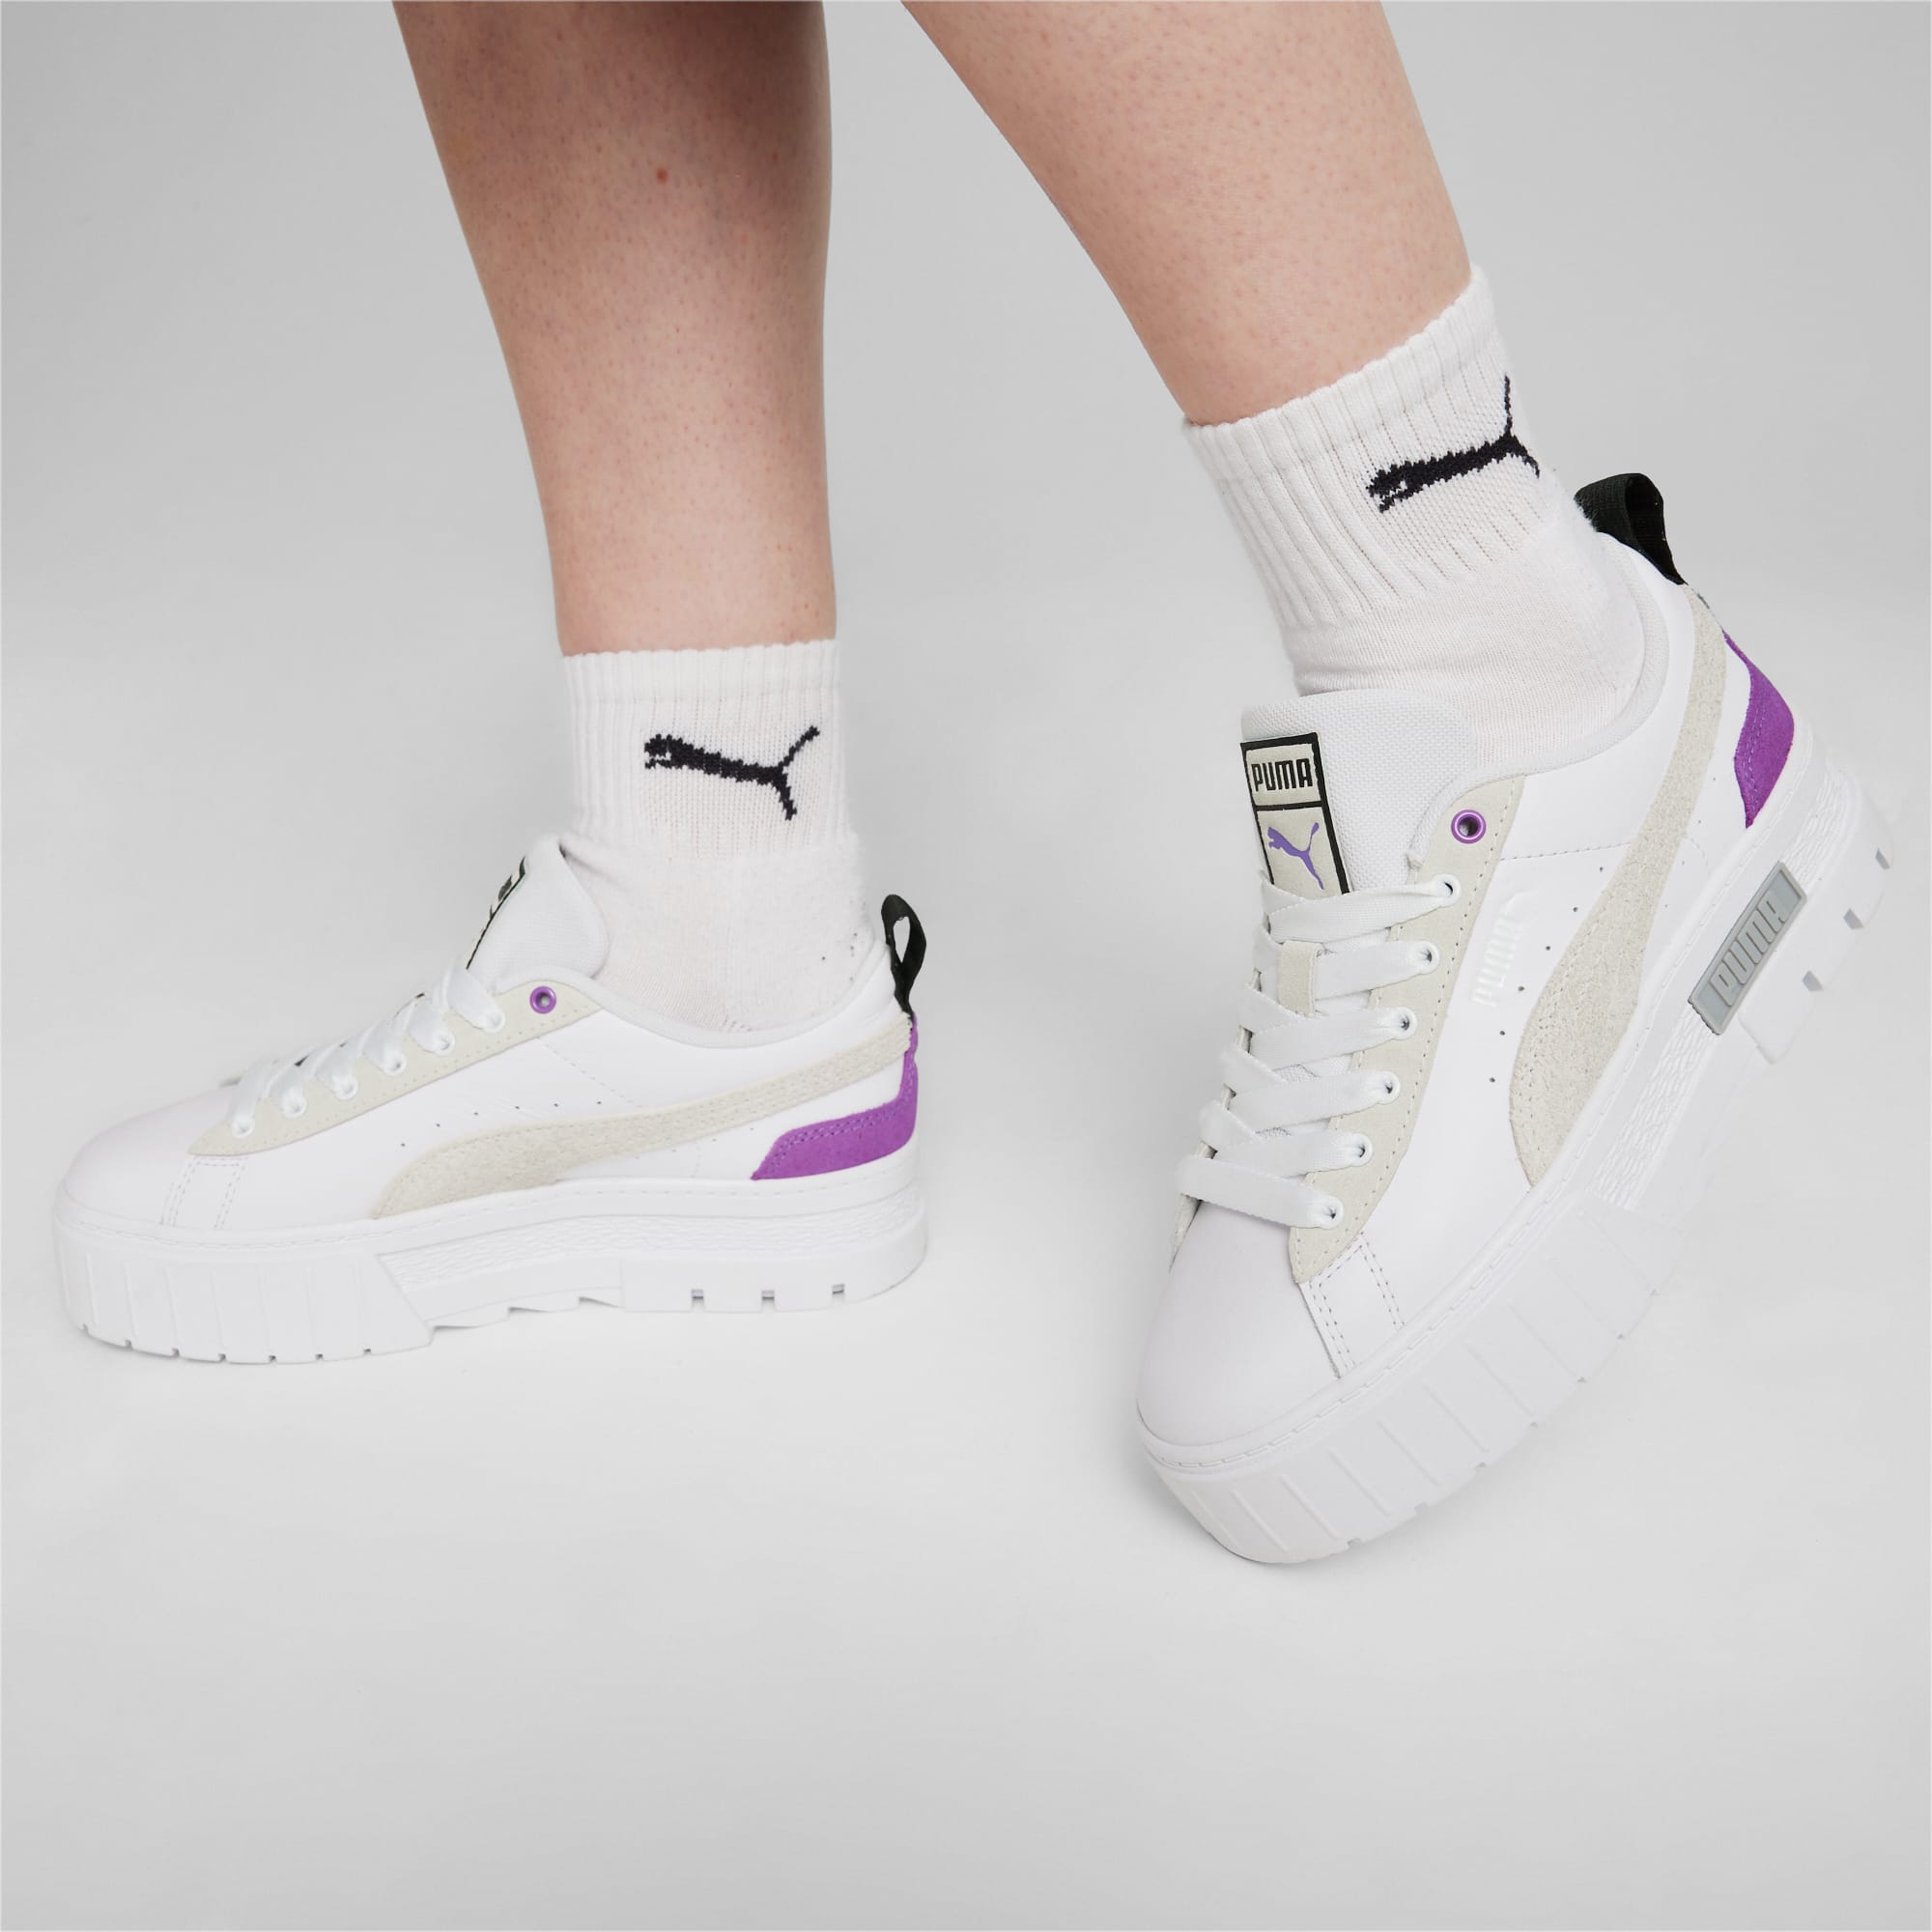 PUMA Mayze Mix Women's Sneakers, White/Ultraviolet, Size 35,5, Shoes